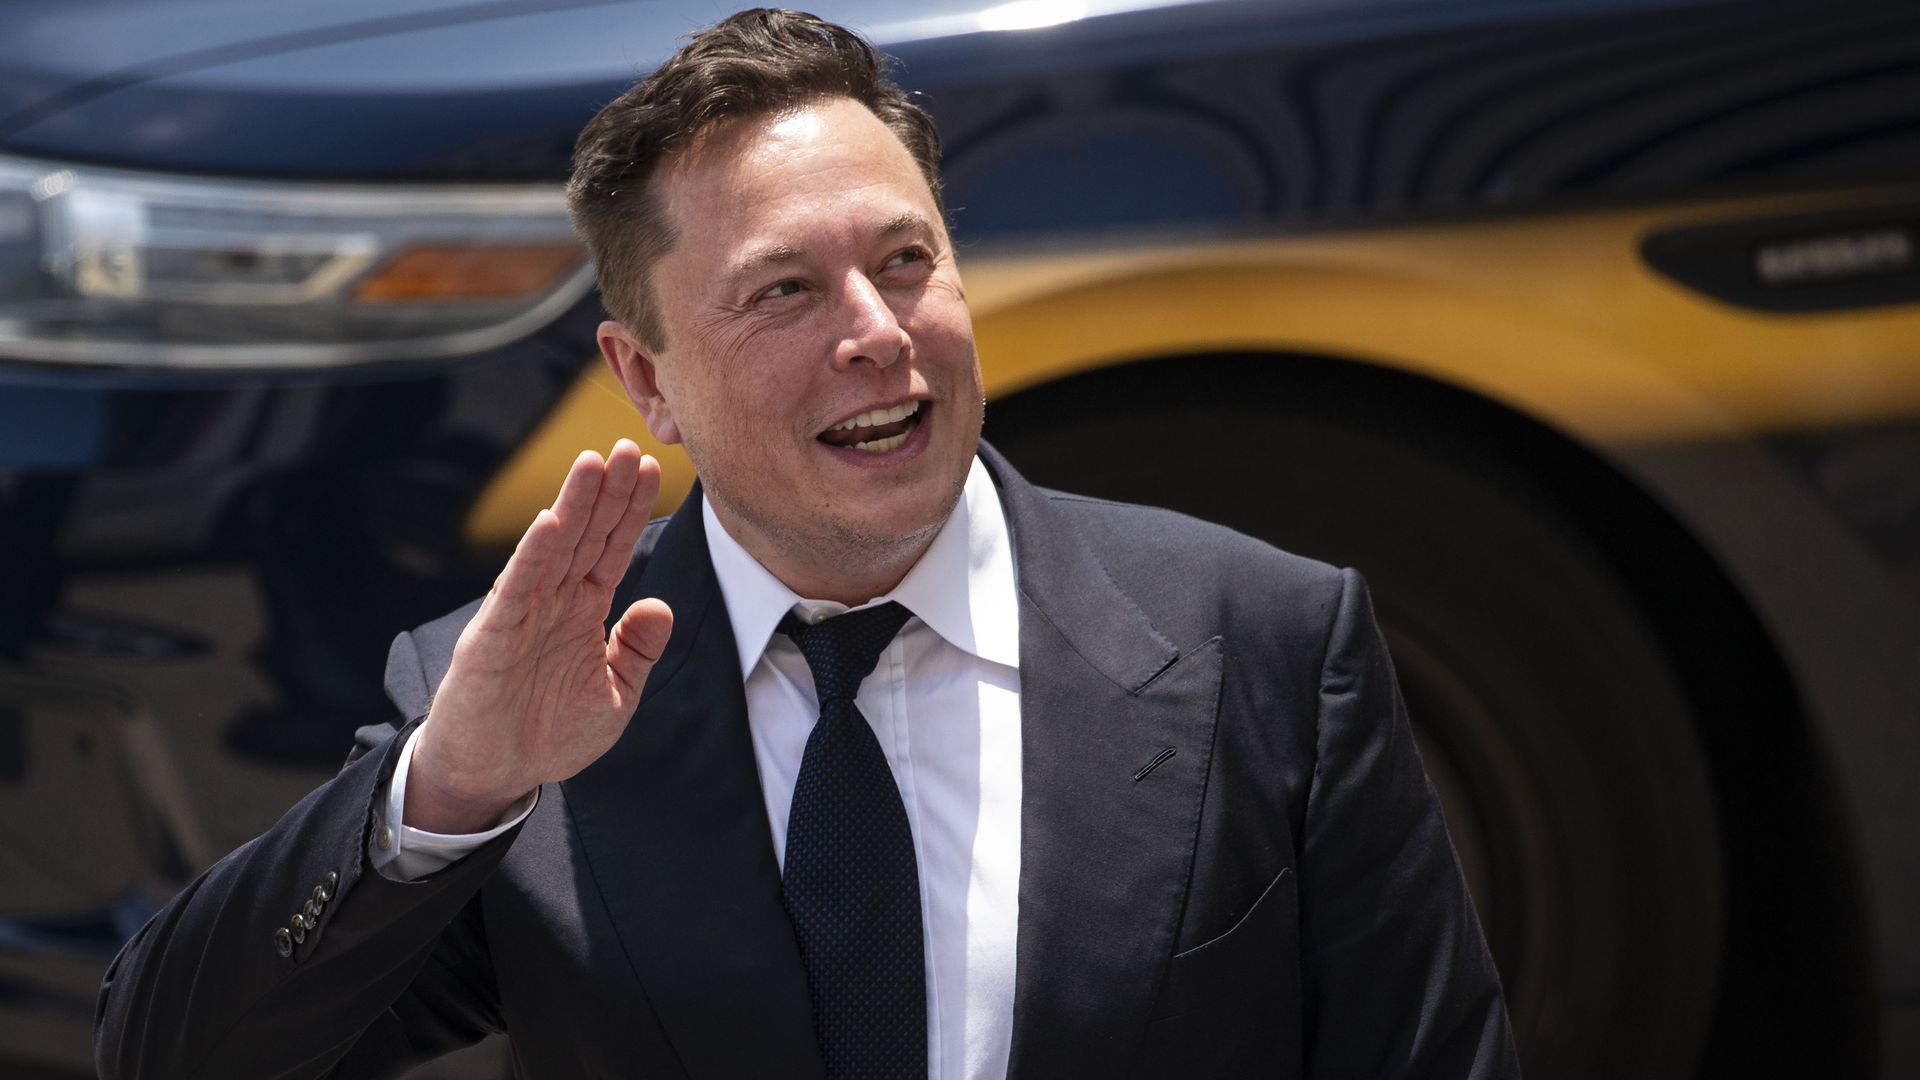 Elon Musk, chief executive officer of Tesla Inc., waves while departing court during the SolarCity trial in Wilmington, Delaware, U.S.